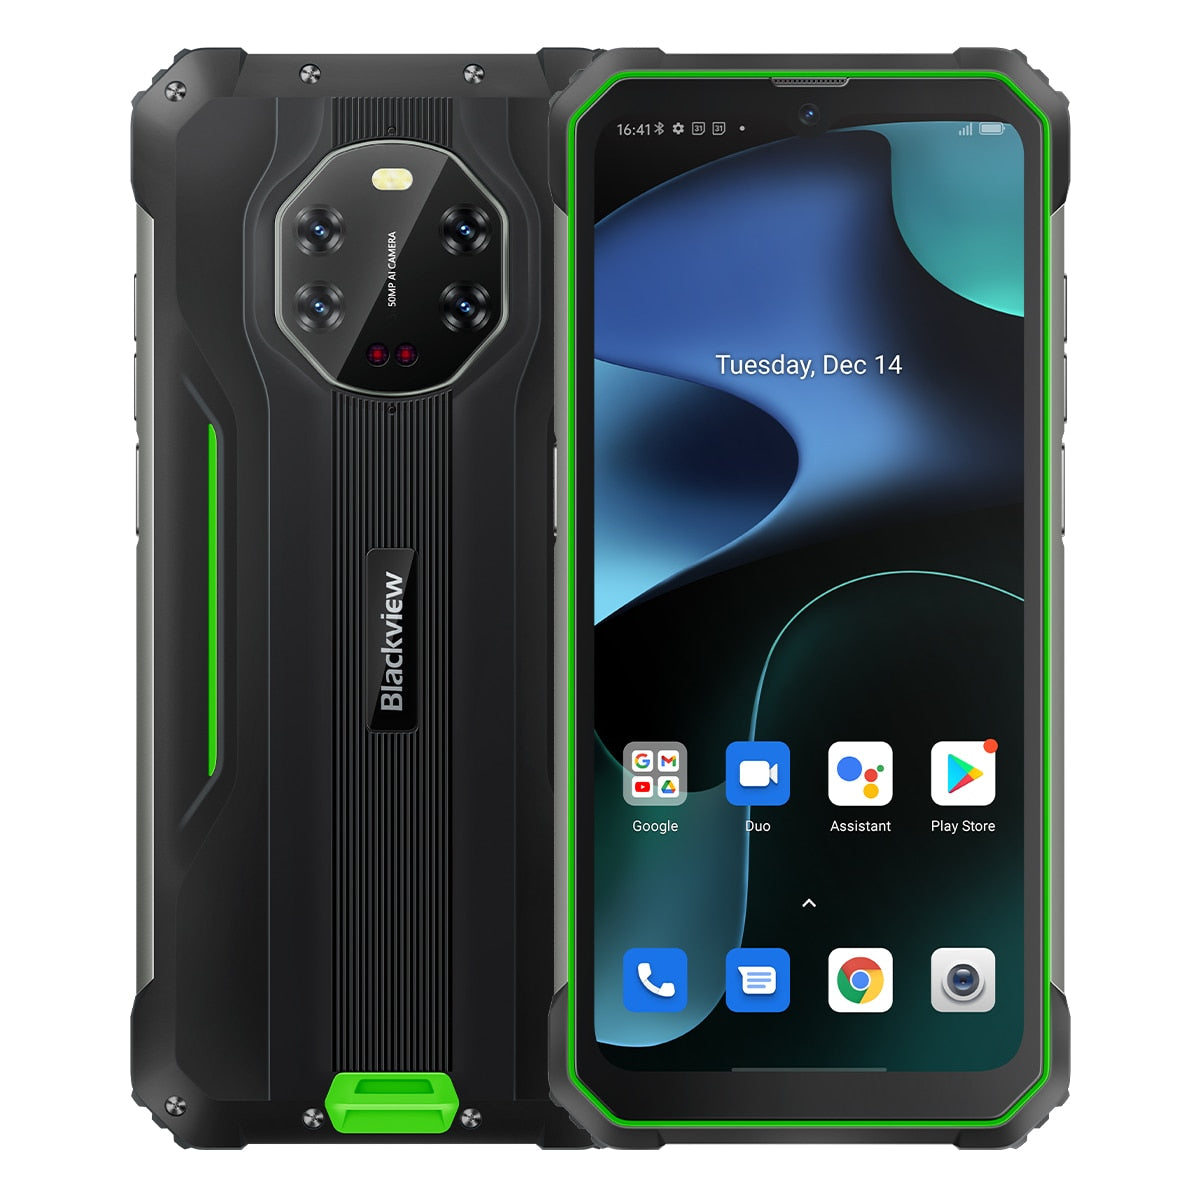 BLACKVIEW BV8800 Rugged Smartphone 8GB+128GB Helio G96 Cell Phone 90Hz Display Mobile Phone 8380mAh 50MP Cameras Global Version